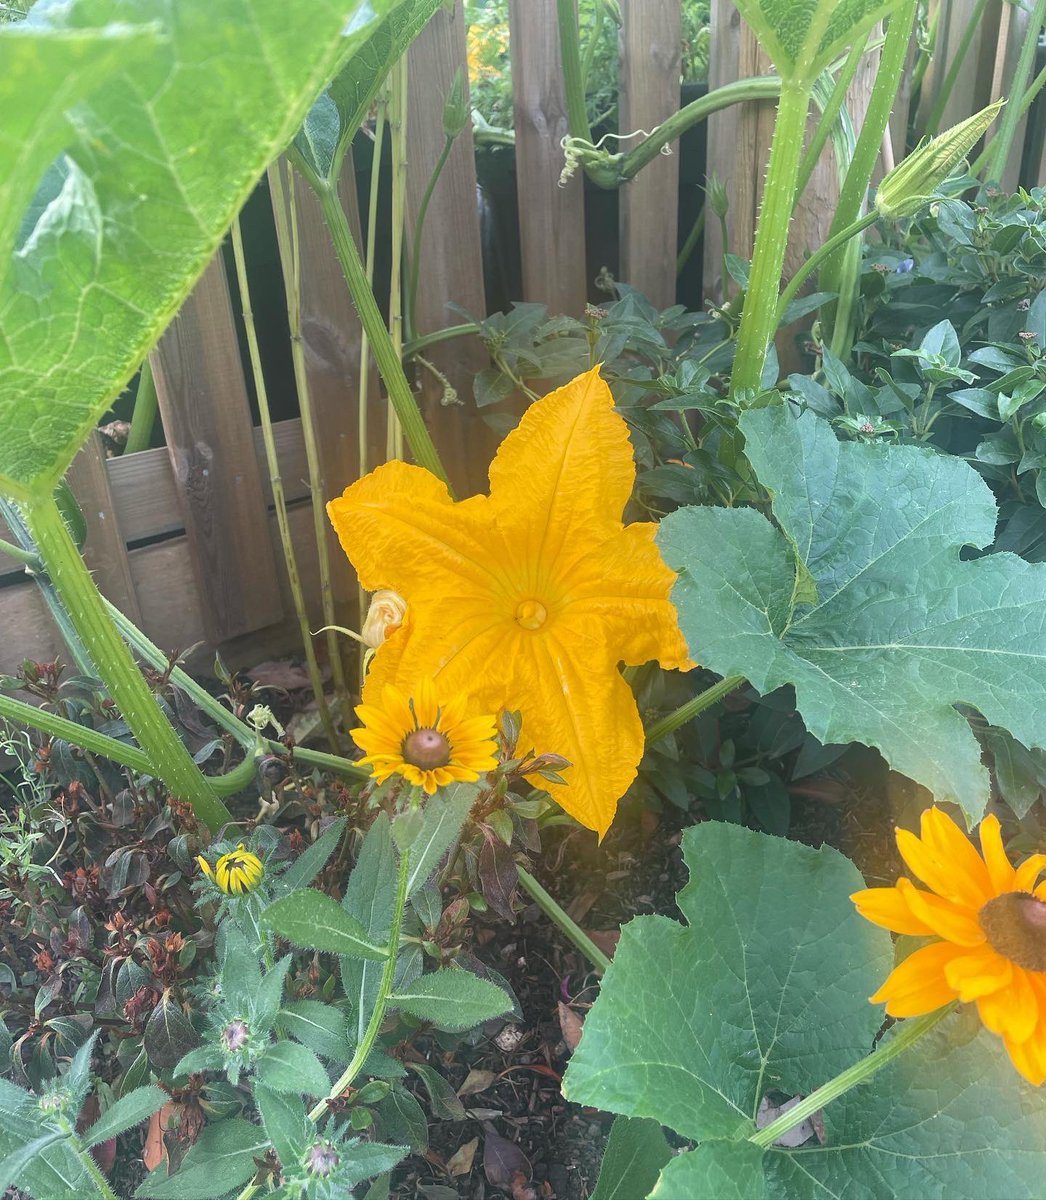 The Pumpkin that escaped the allotment to be a Rudbeckia!!!
It has the makings of a beautiful story……

#allotmentlife #growyourown #gardening #allotmentuk  #kitchengarden #homegrown